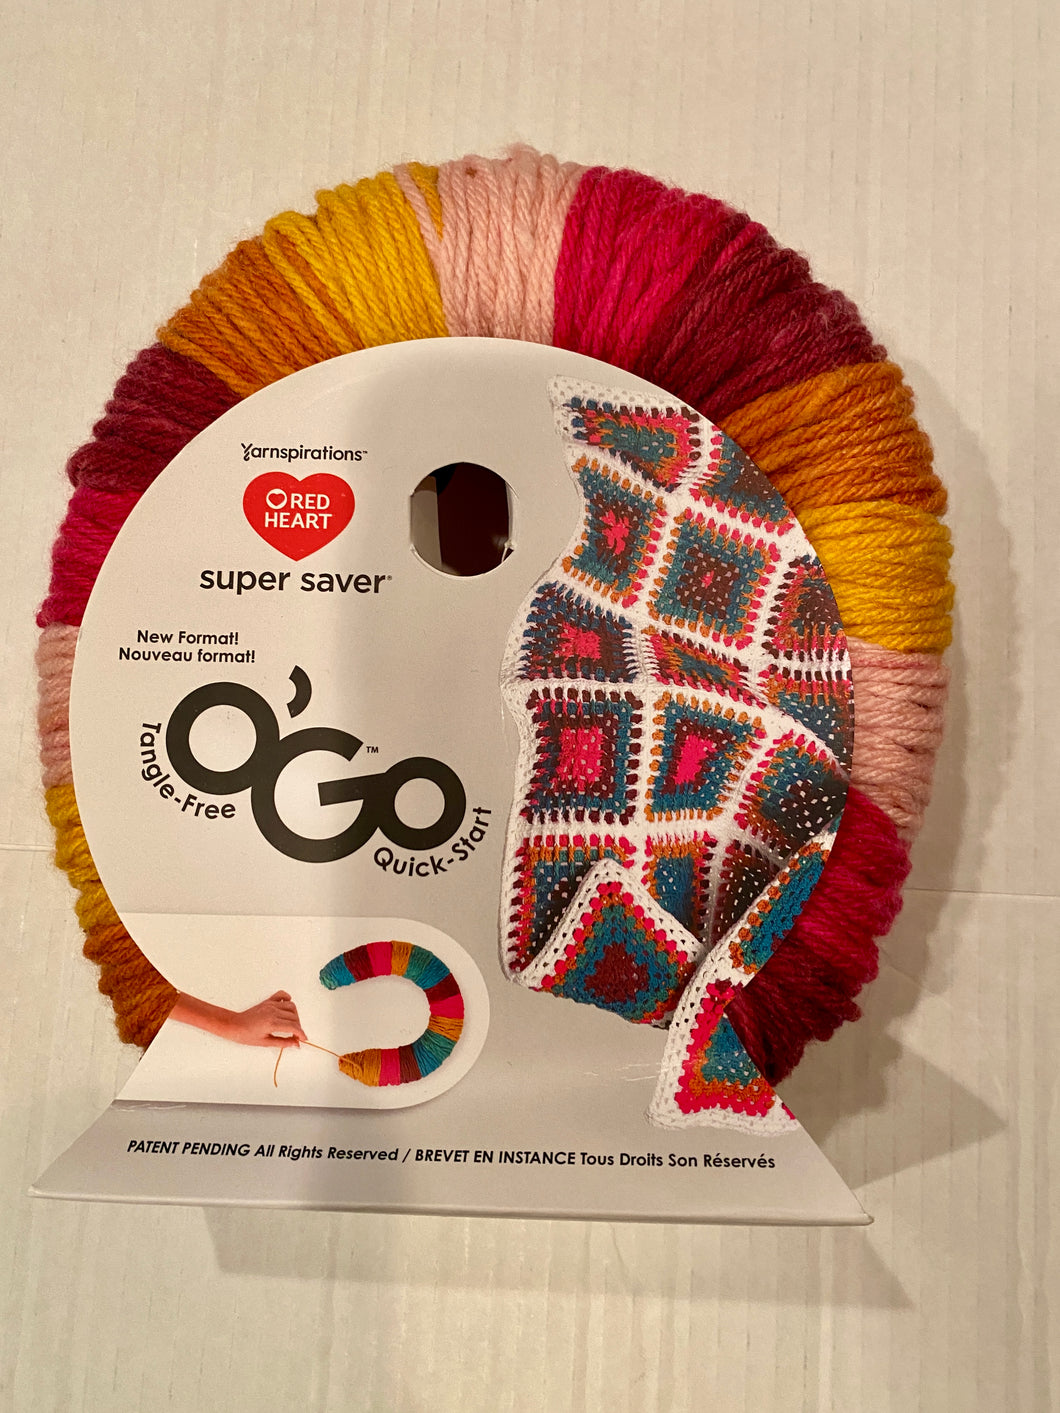 NWT red heart O’Go yarn in pink and gold 236 yards